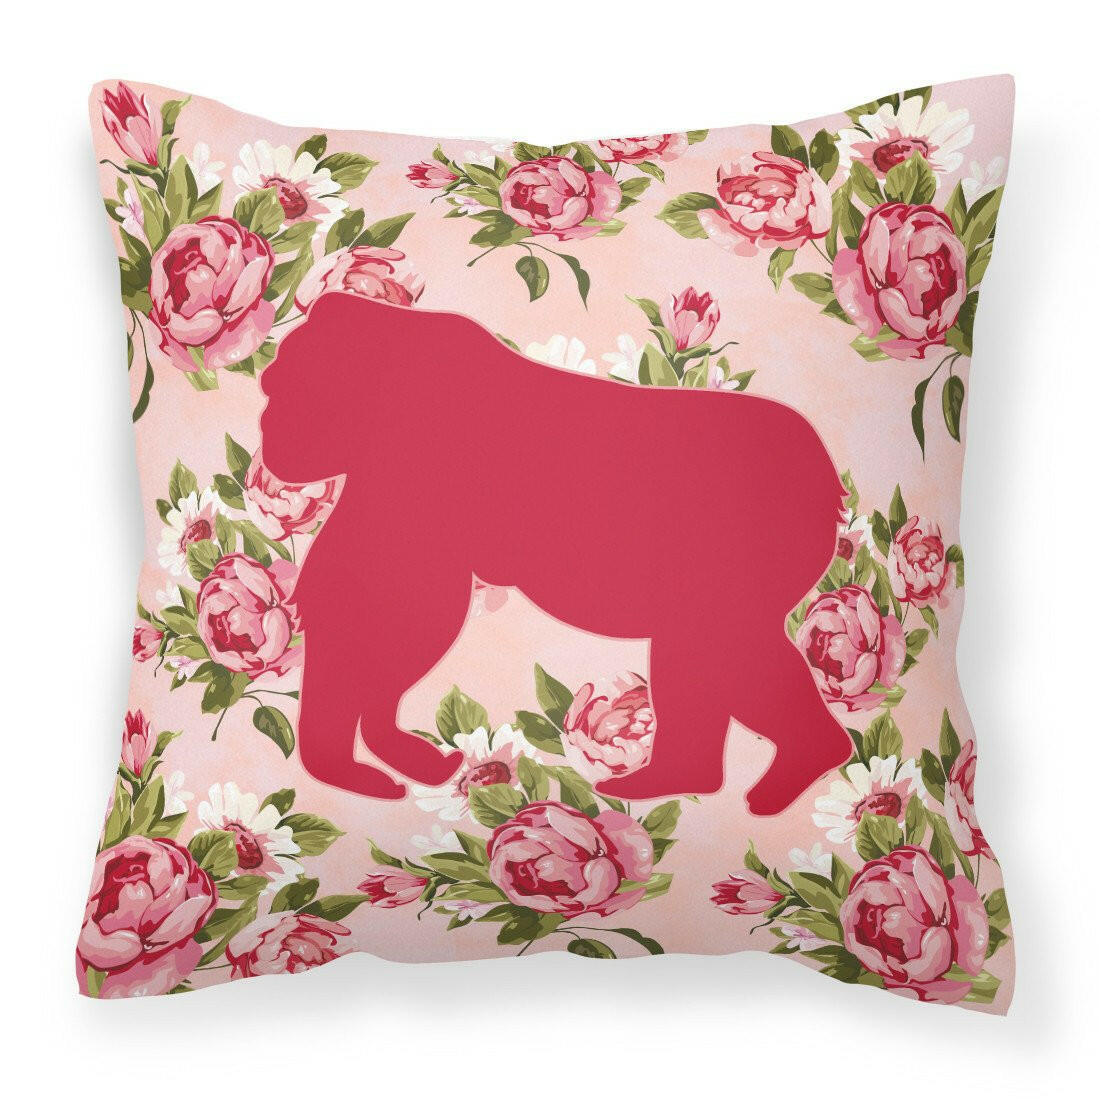 Gorilla Shabby Chic Pink Roses  Fabric Decorative Pillow BB1129-RS-PK-PW1414 - the-store.com